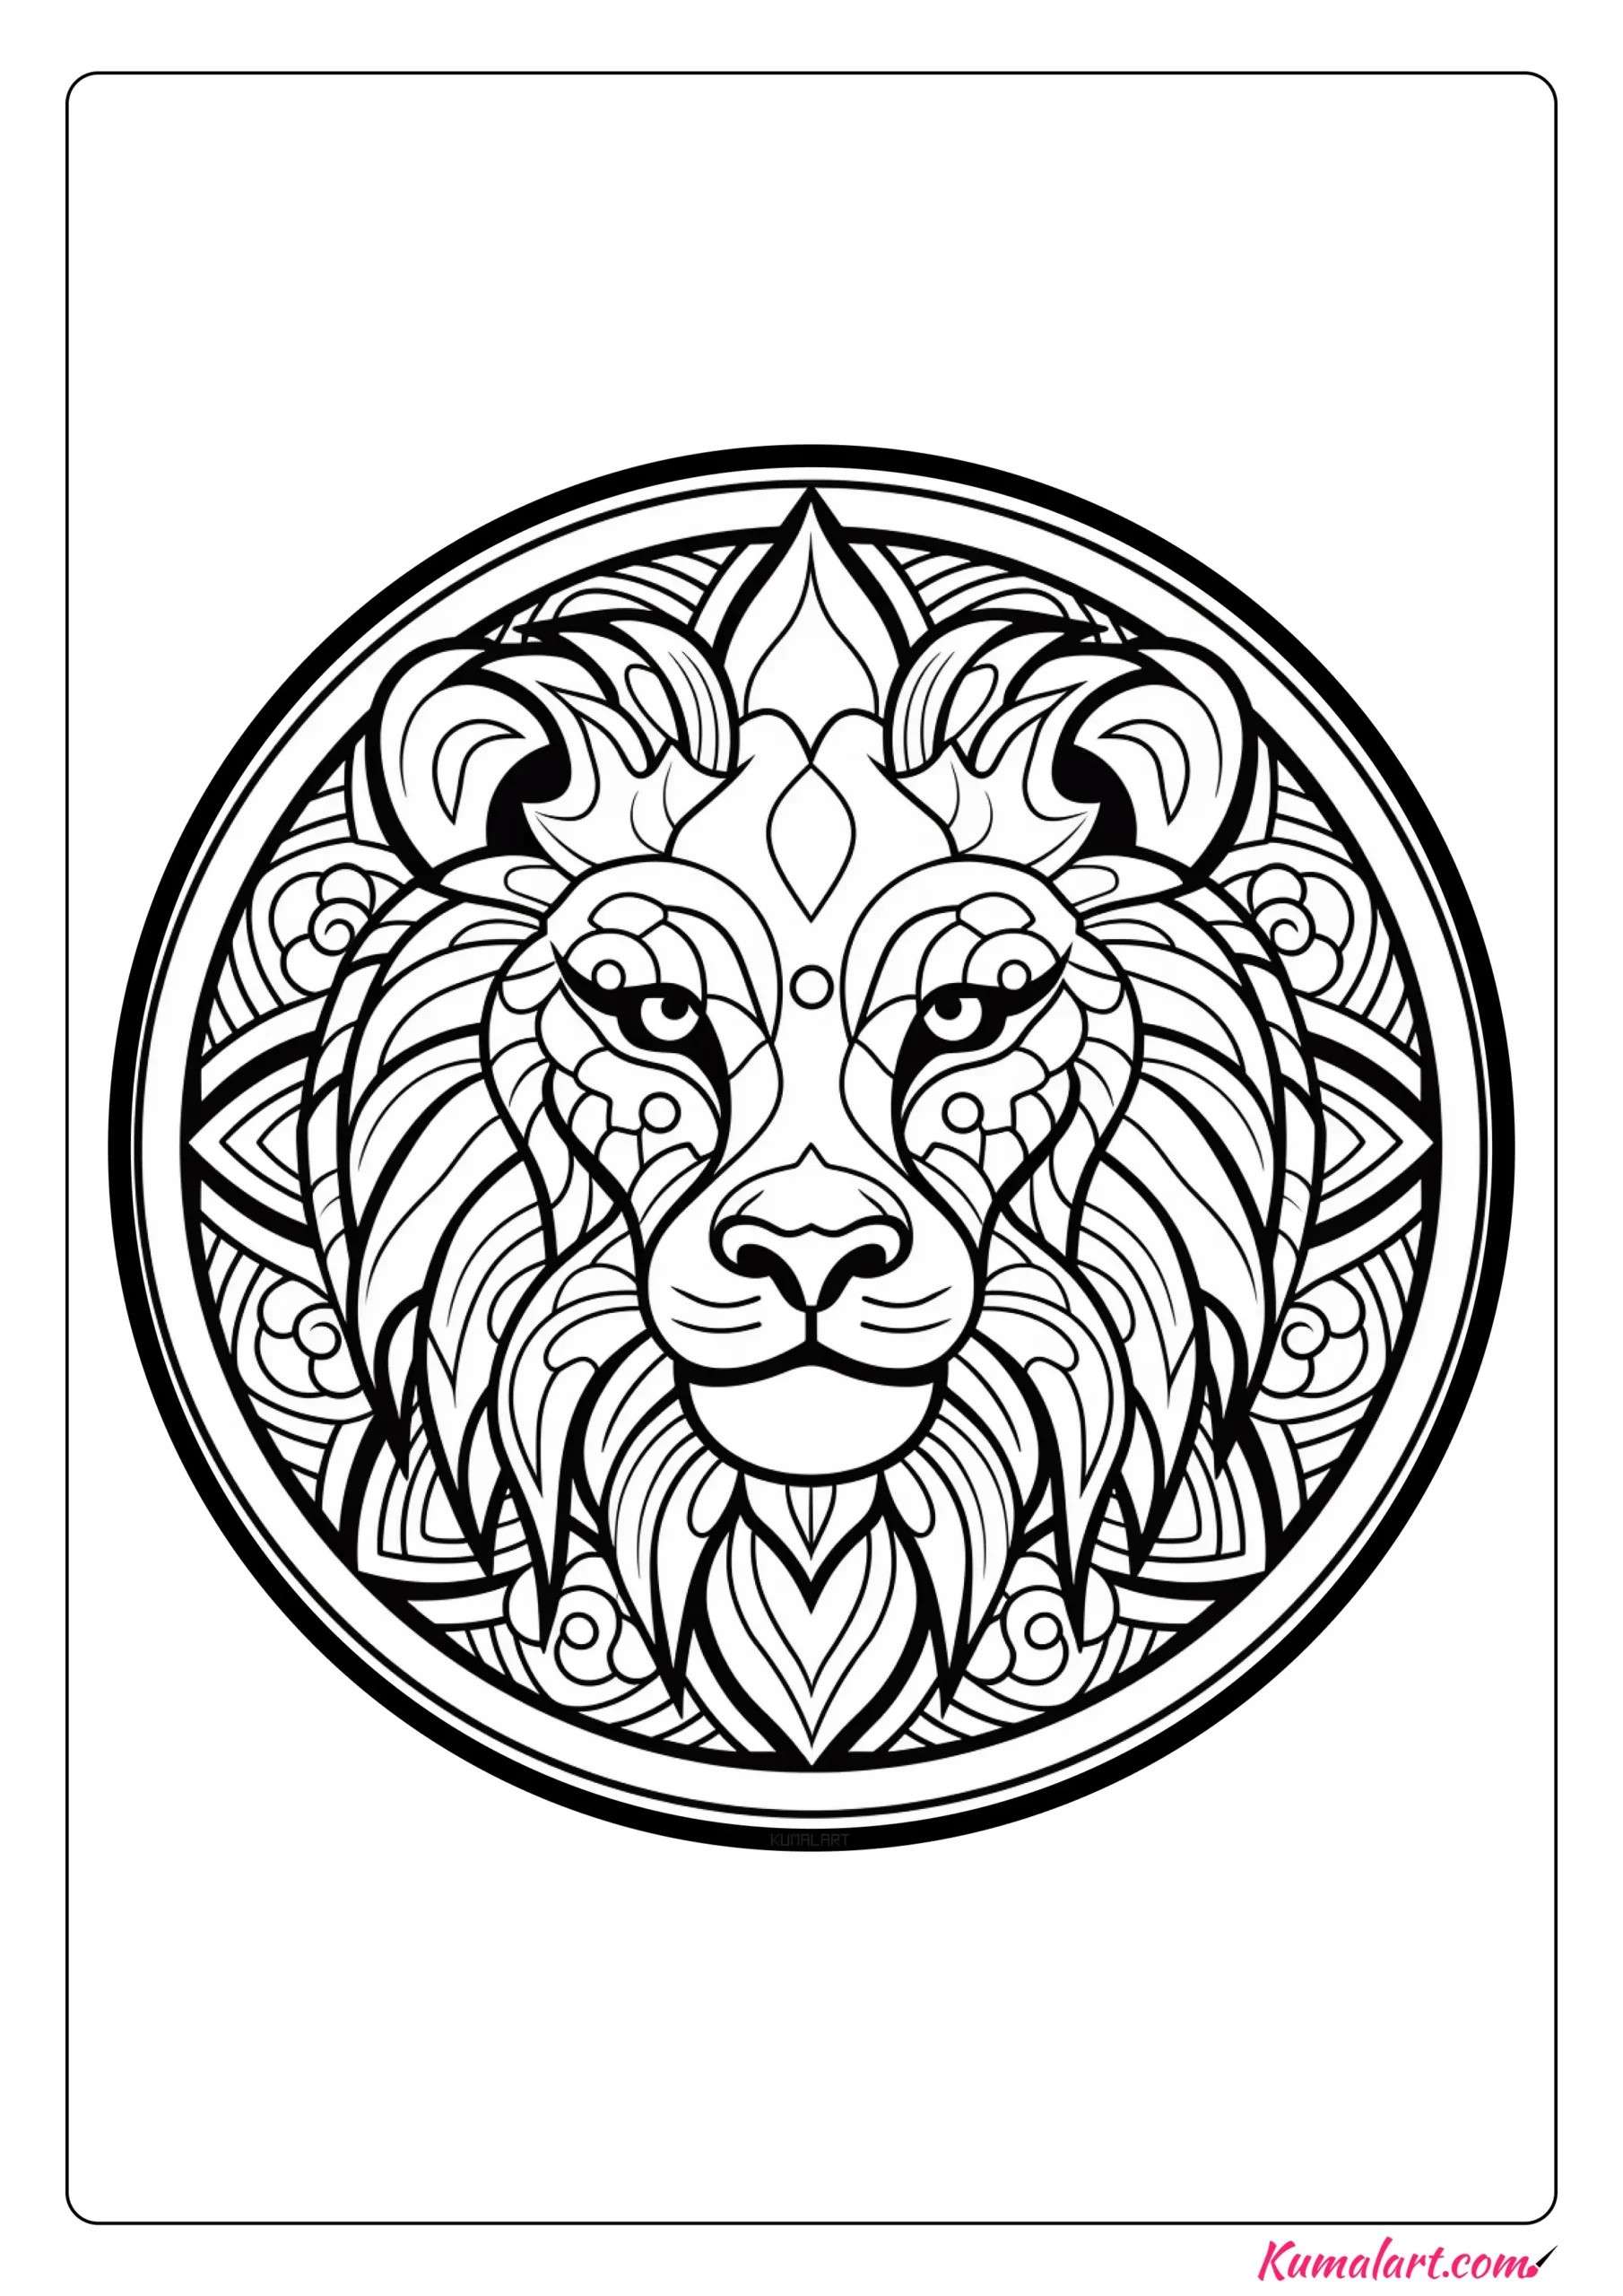 Beatrice the Lion Coloring Page